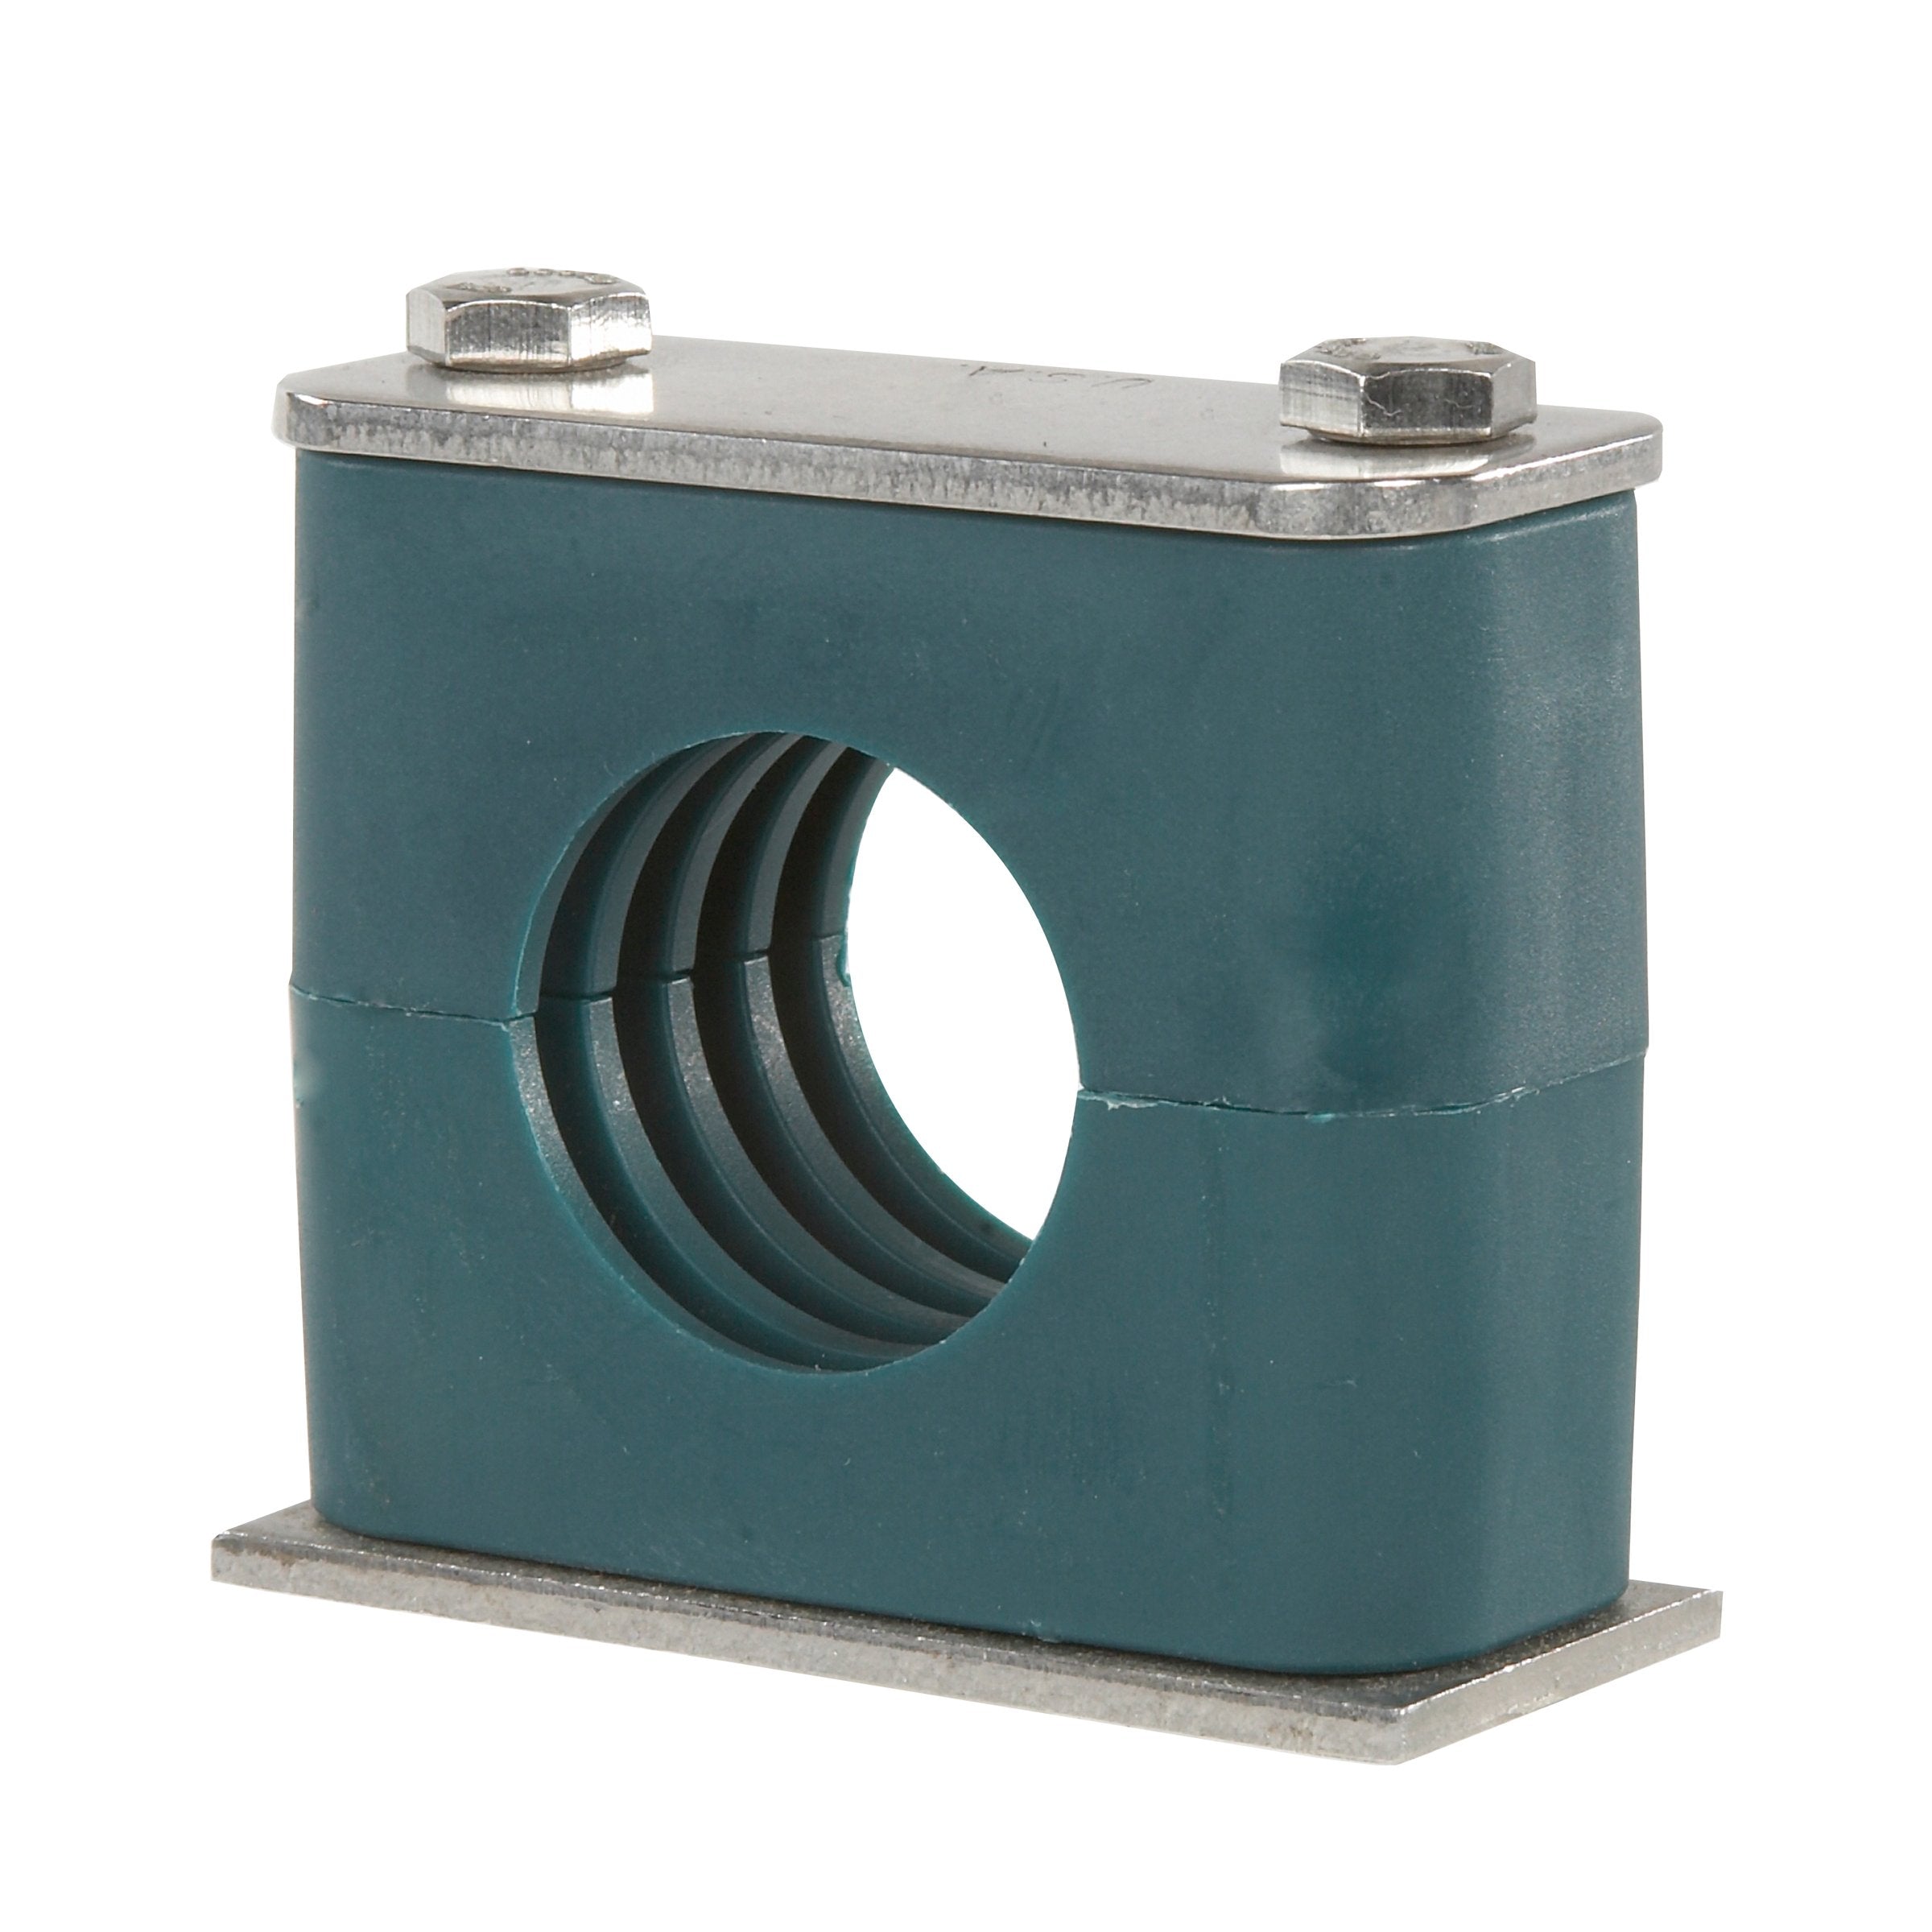 SP-110A-PP-DP-AS-U-W5 : Stauff Clamp, Single Weld Plate, 0.394" (10mm) OD, for 1/8" Pipe, Green PP Insert, Profiled Interior, 316SS